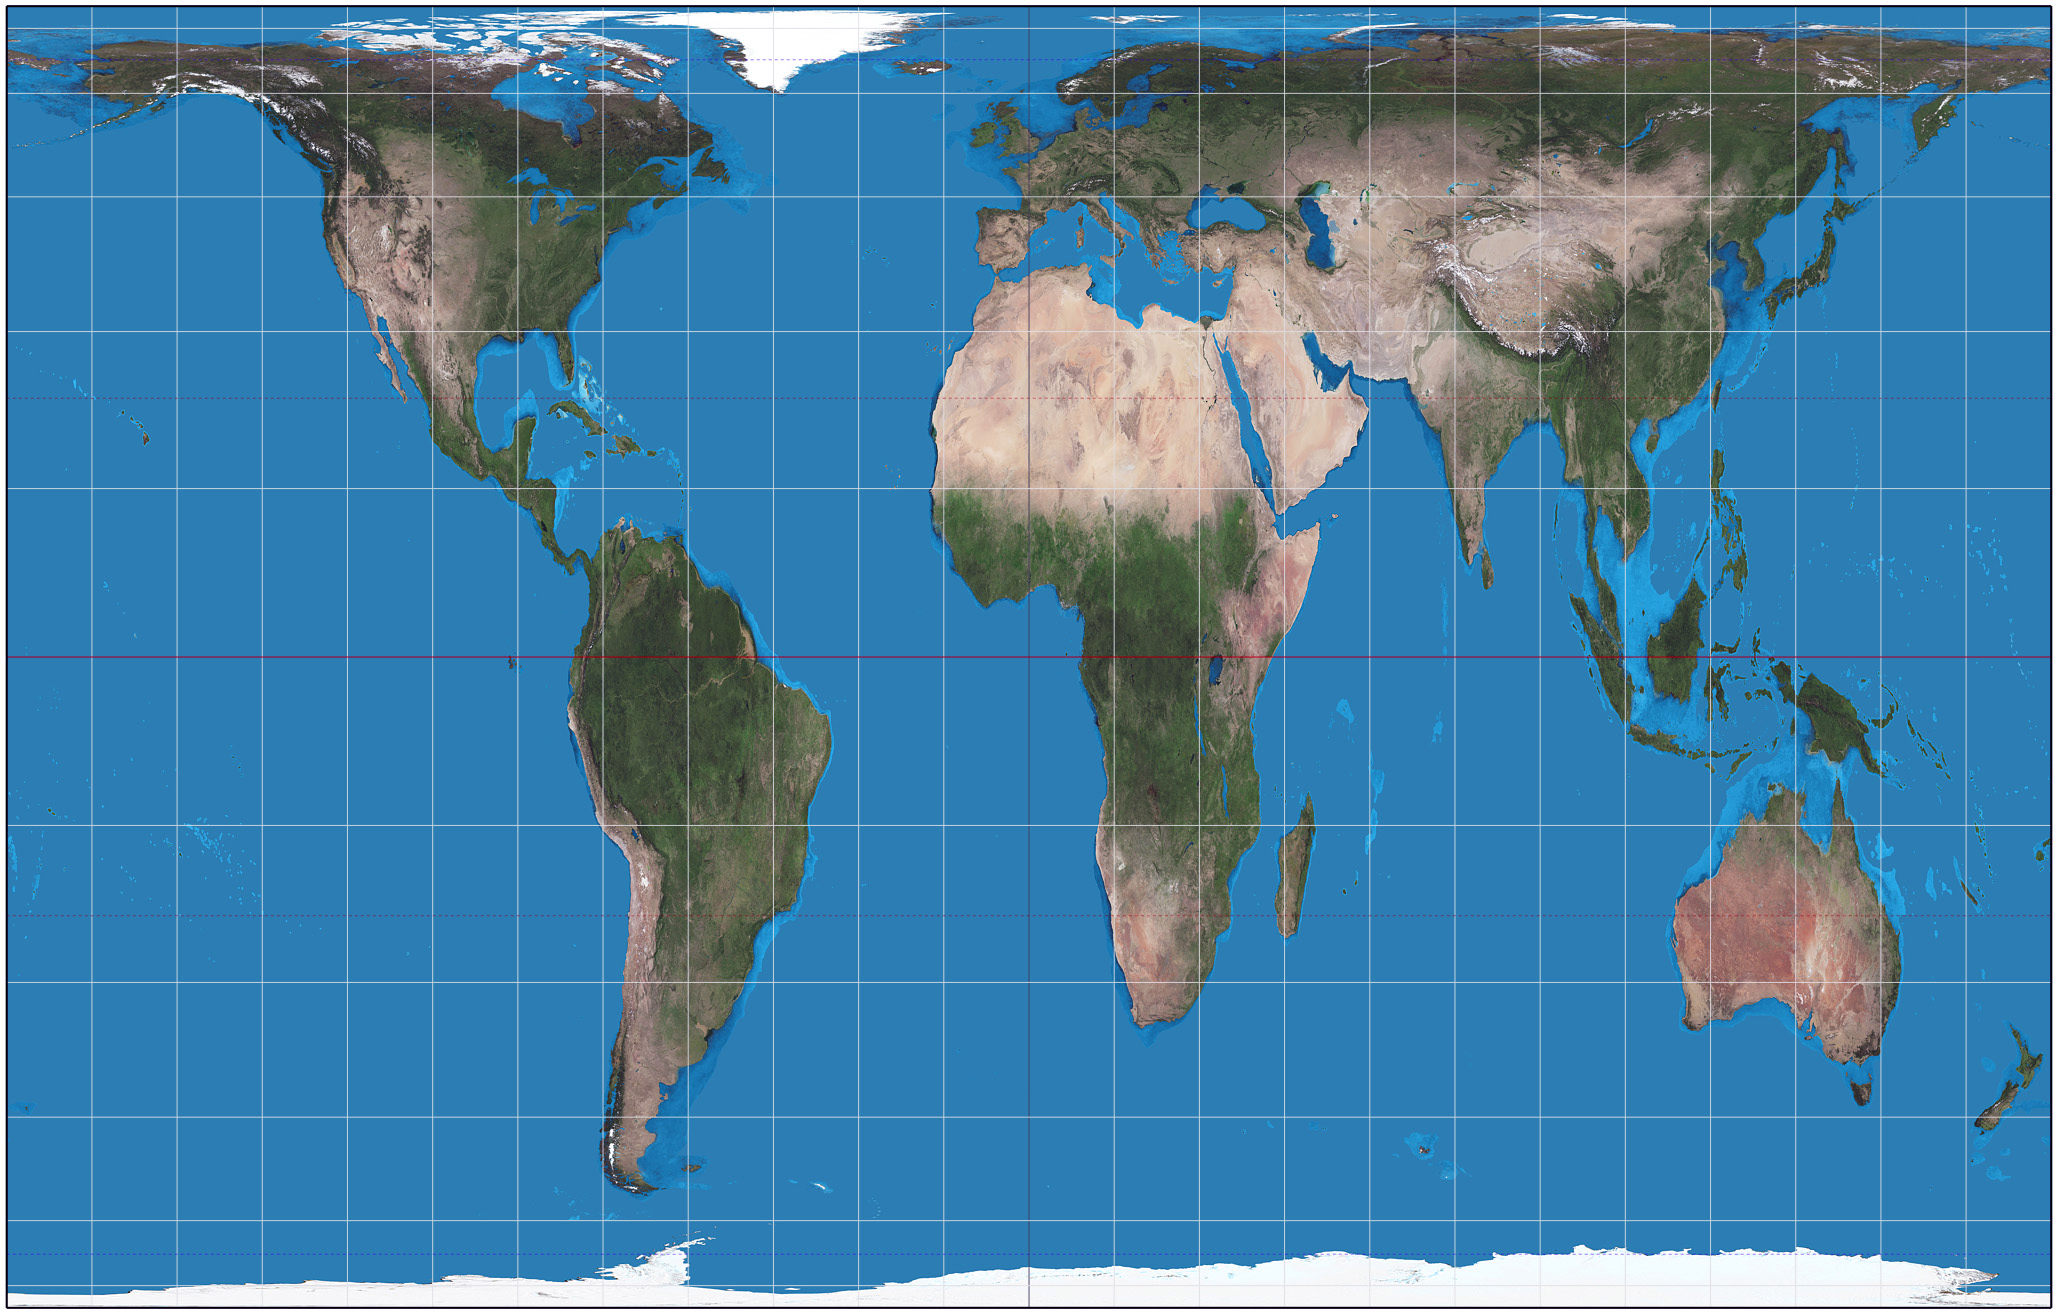 Gall–Peters projection (map: Strebe, CC BY-SA 3.0)